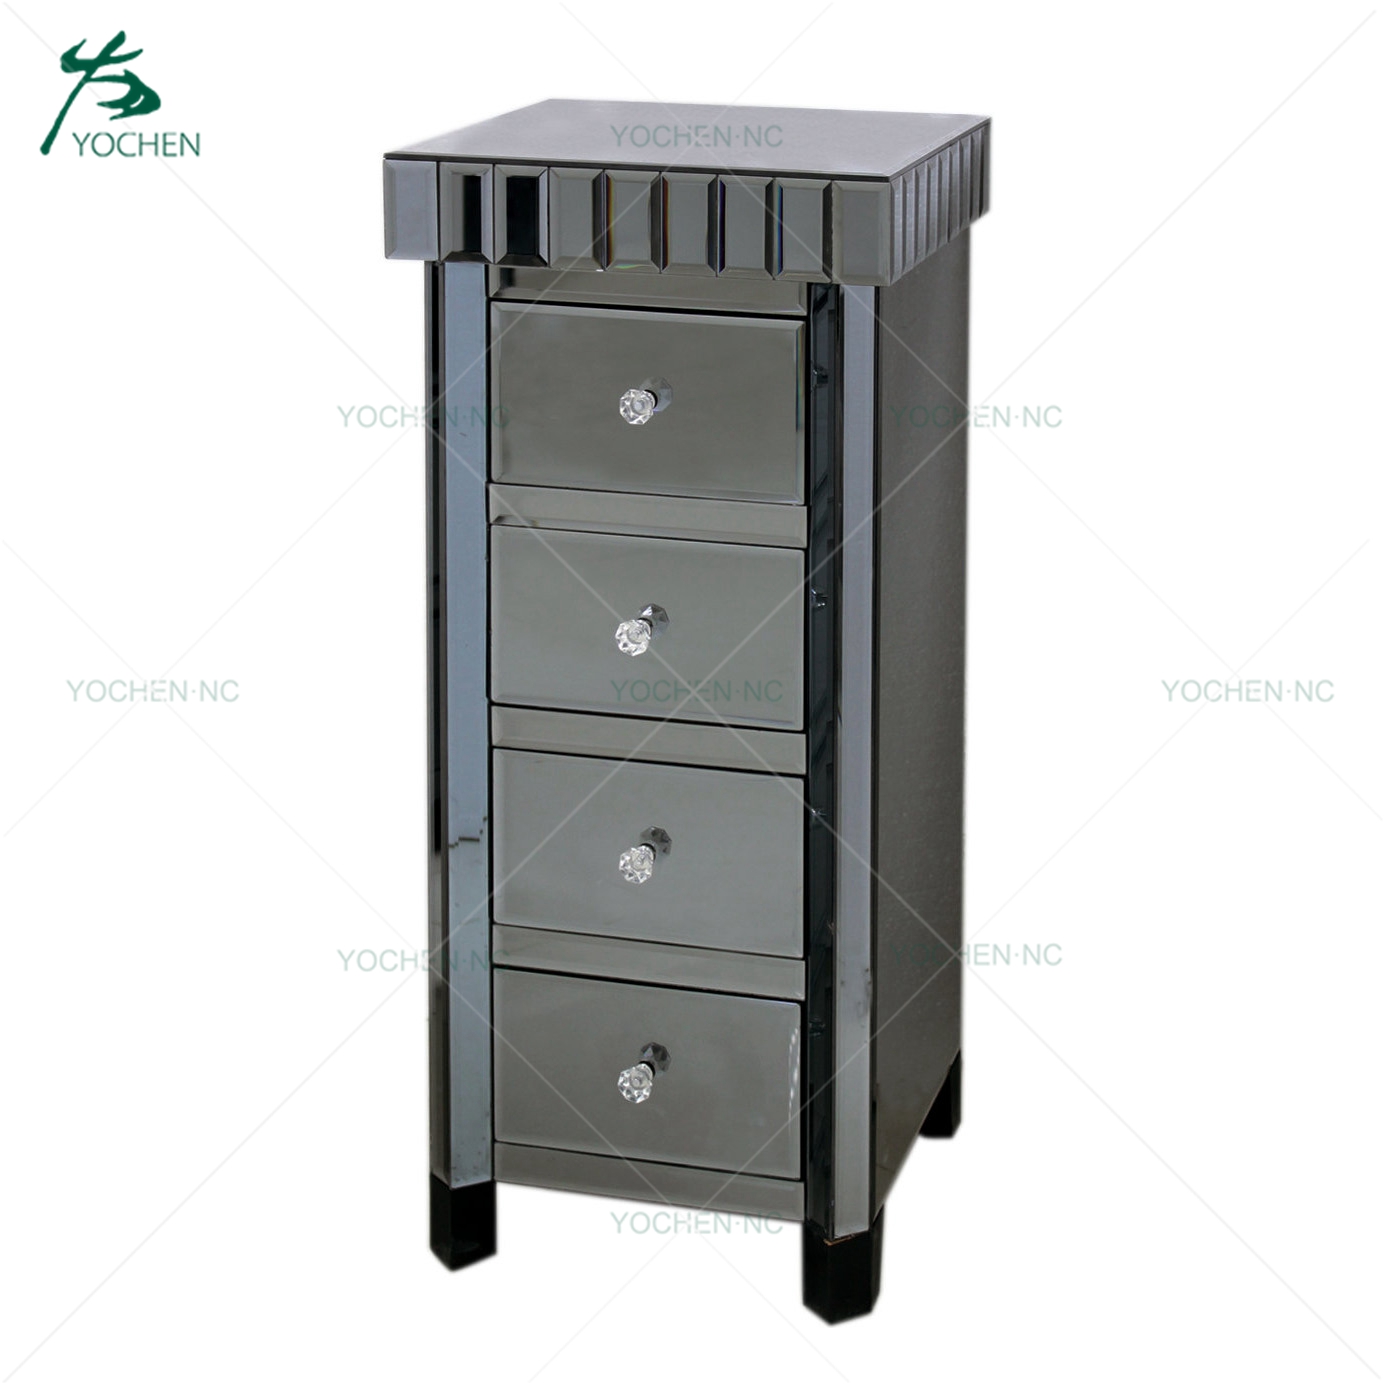 5 drawers tallboy narrow chest of drawers mirrored bedroom furniture